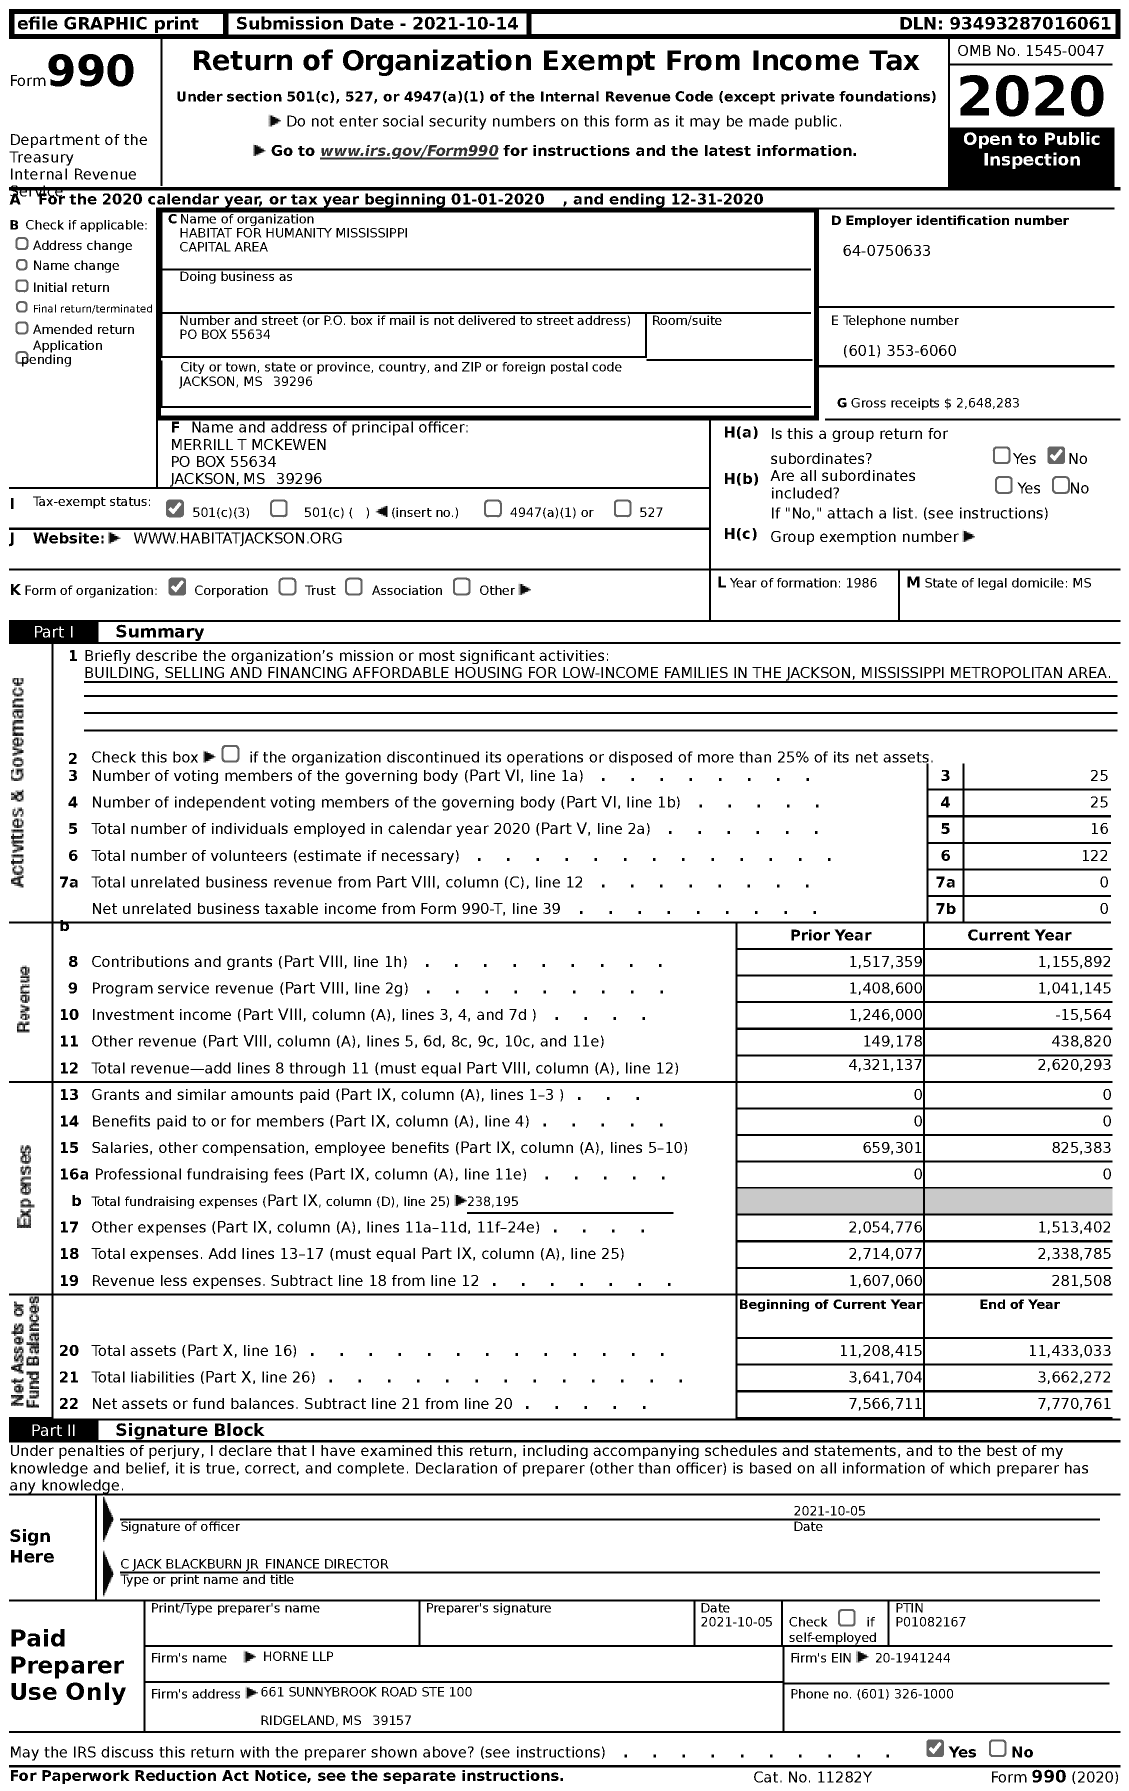 Image of first page of 2020 Form 990 for Habitat for Humanity - Mississippi Capital Area